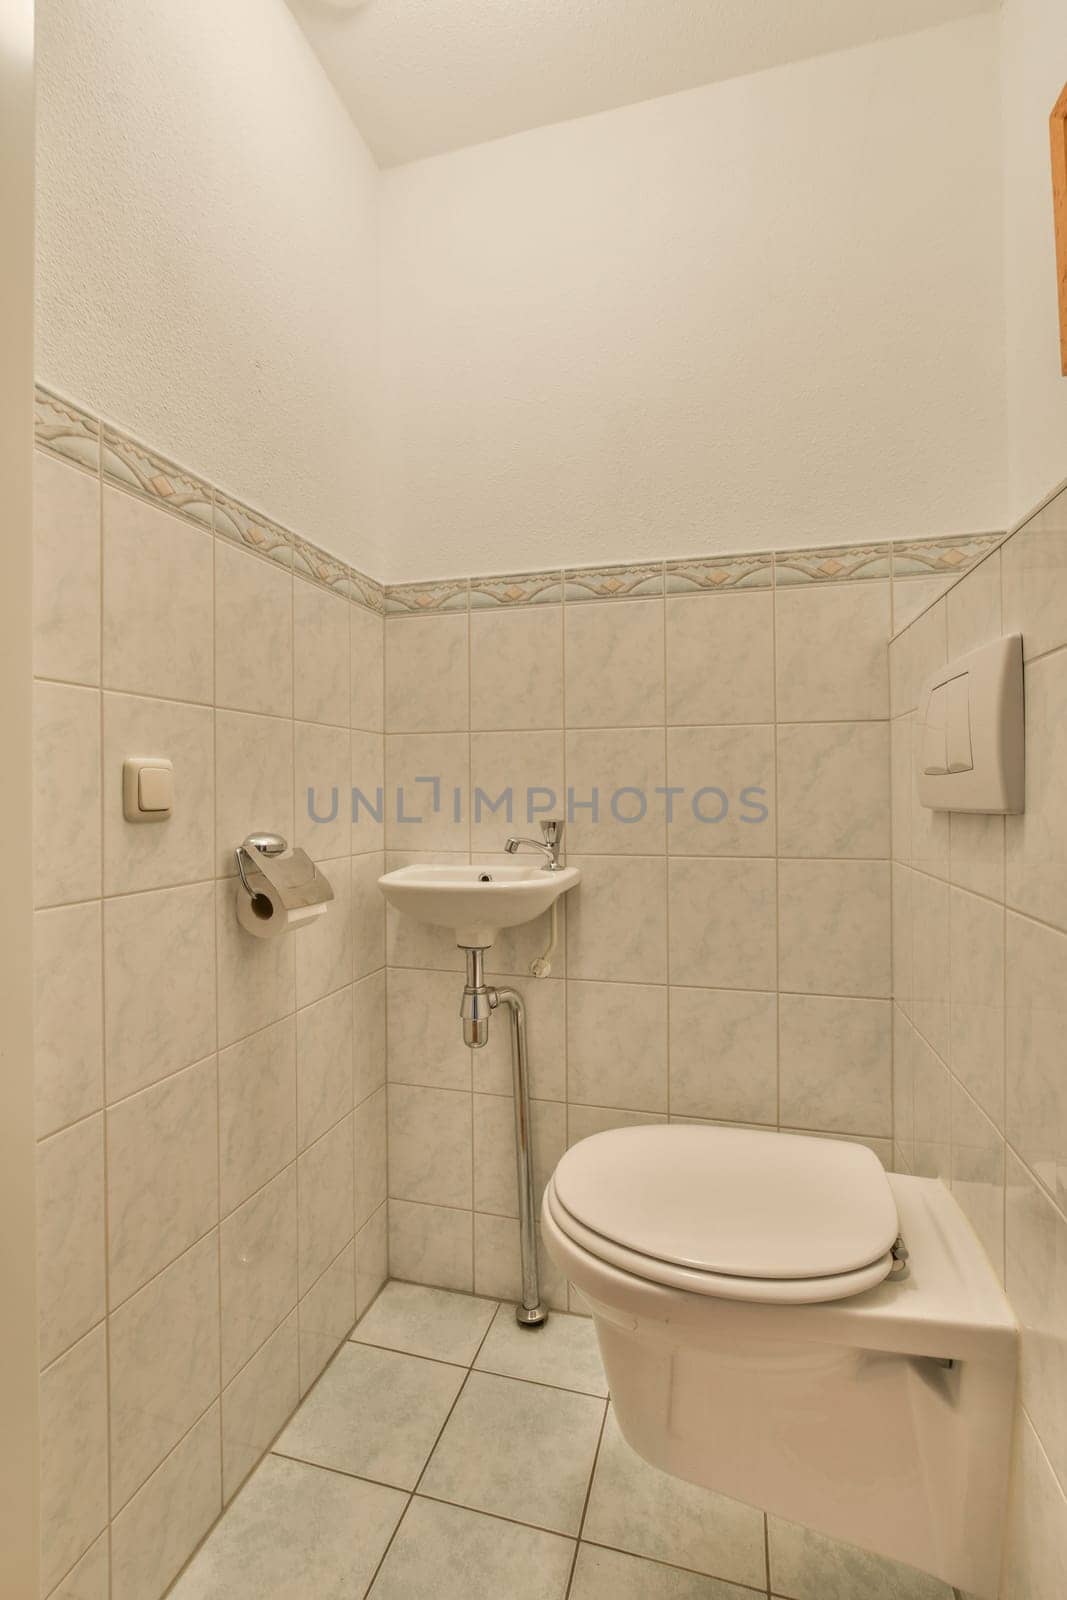 a small bathroom with white tiles on the walls, and a toilet in the corner next to the sink area